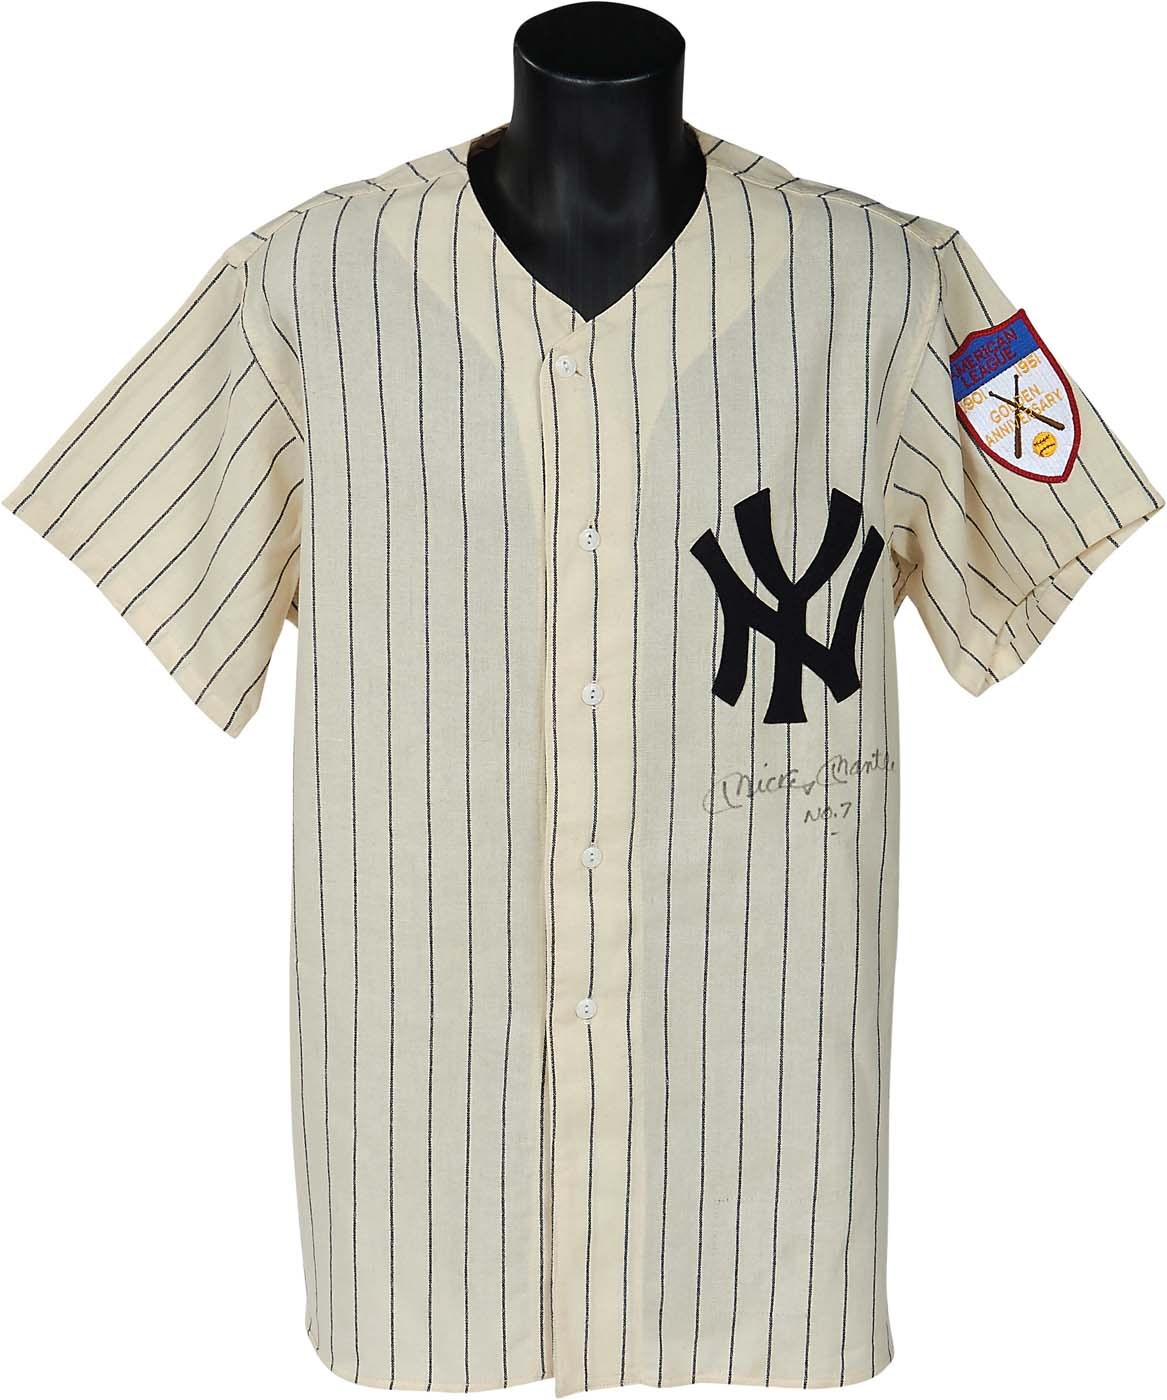 Mickey Mantle "No.7" Signed Commemorative 1951 Yankees Jersey (PSA)